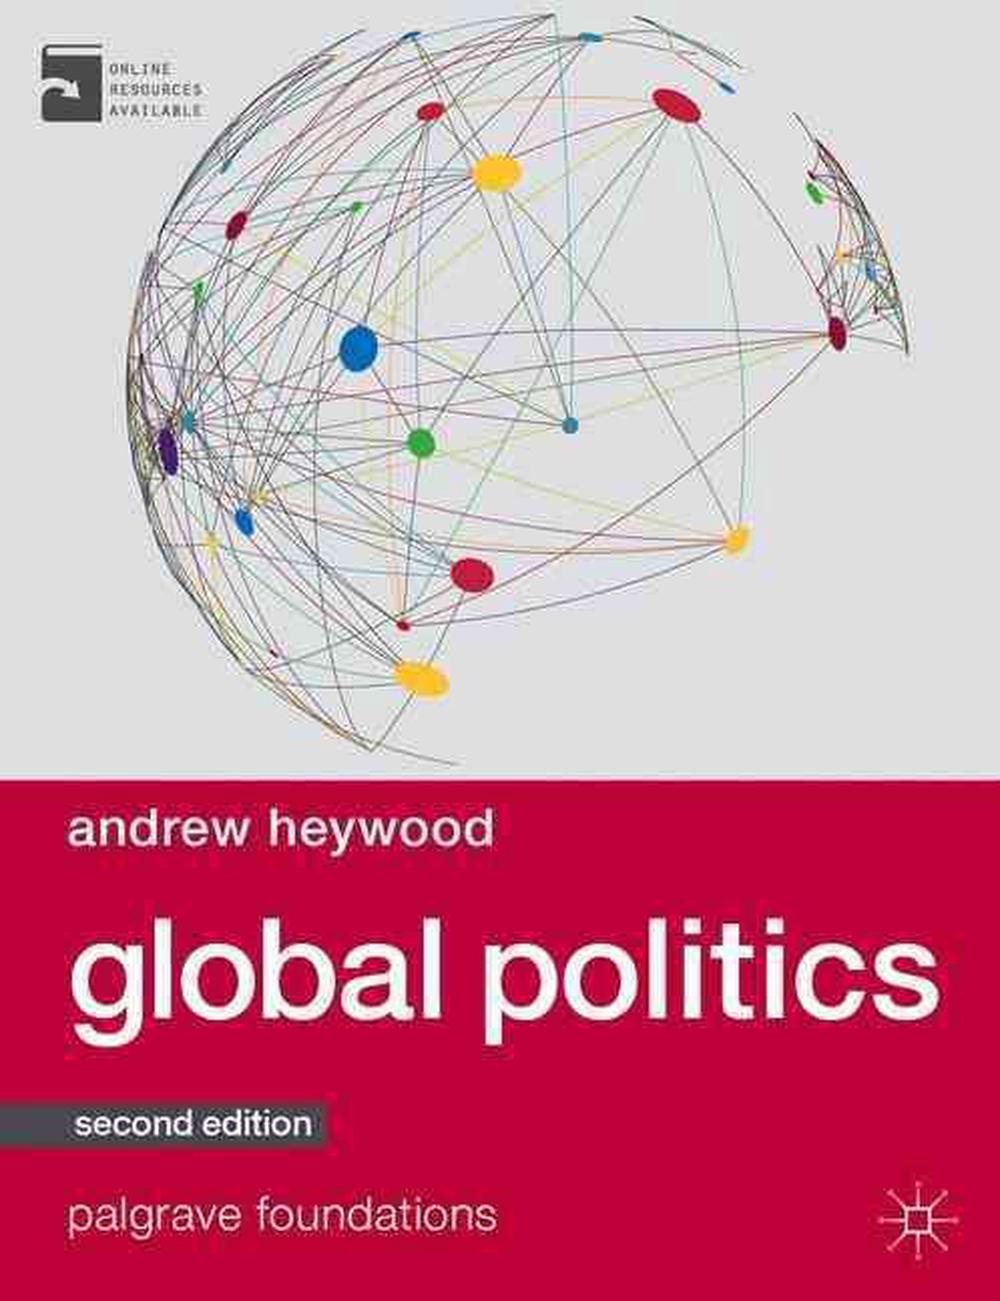 Global Politics 2nd Edition by Andrew Heywood (English) Paperback Book Free Ship eBay